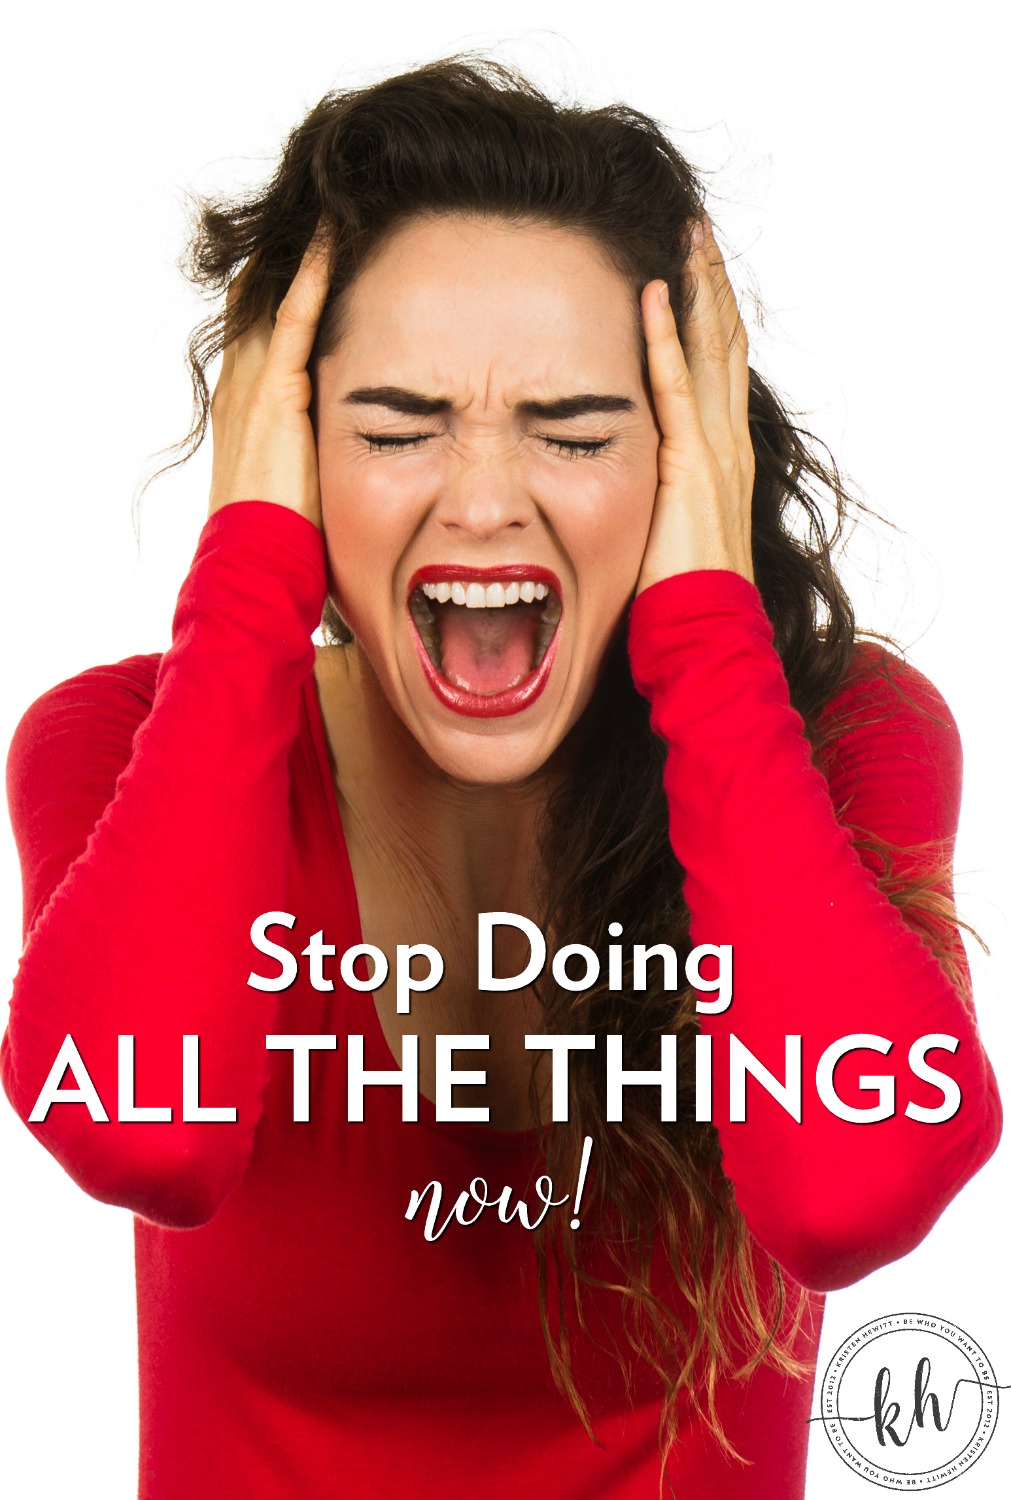 Do you have a hard time saying no to everything? So did I. It's hard to let others down. So here are 9 ways to say no without being a total jerkface.